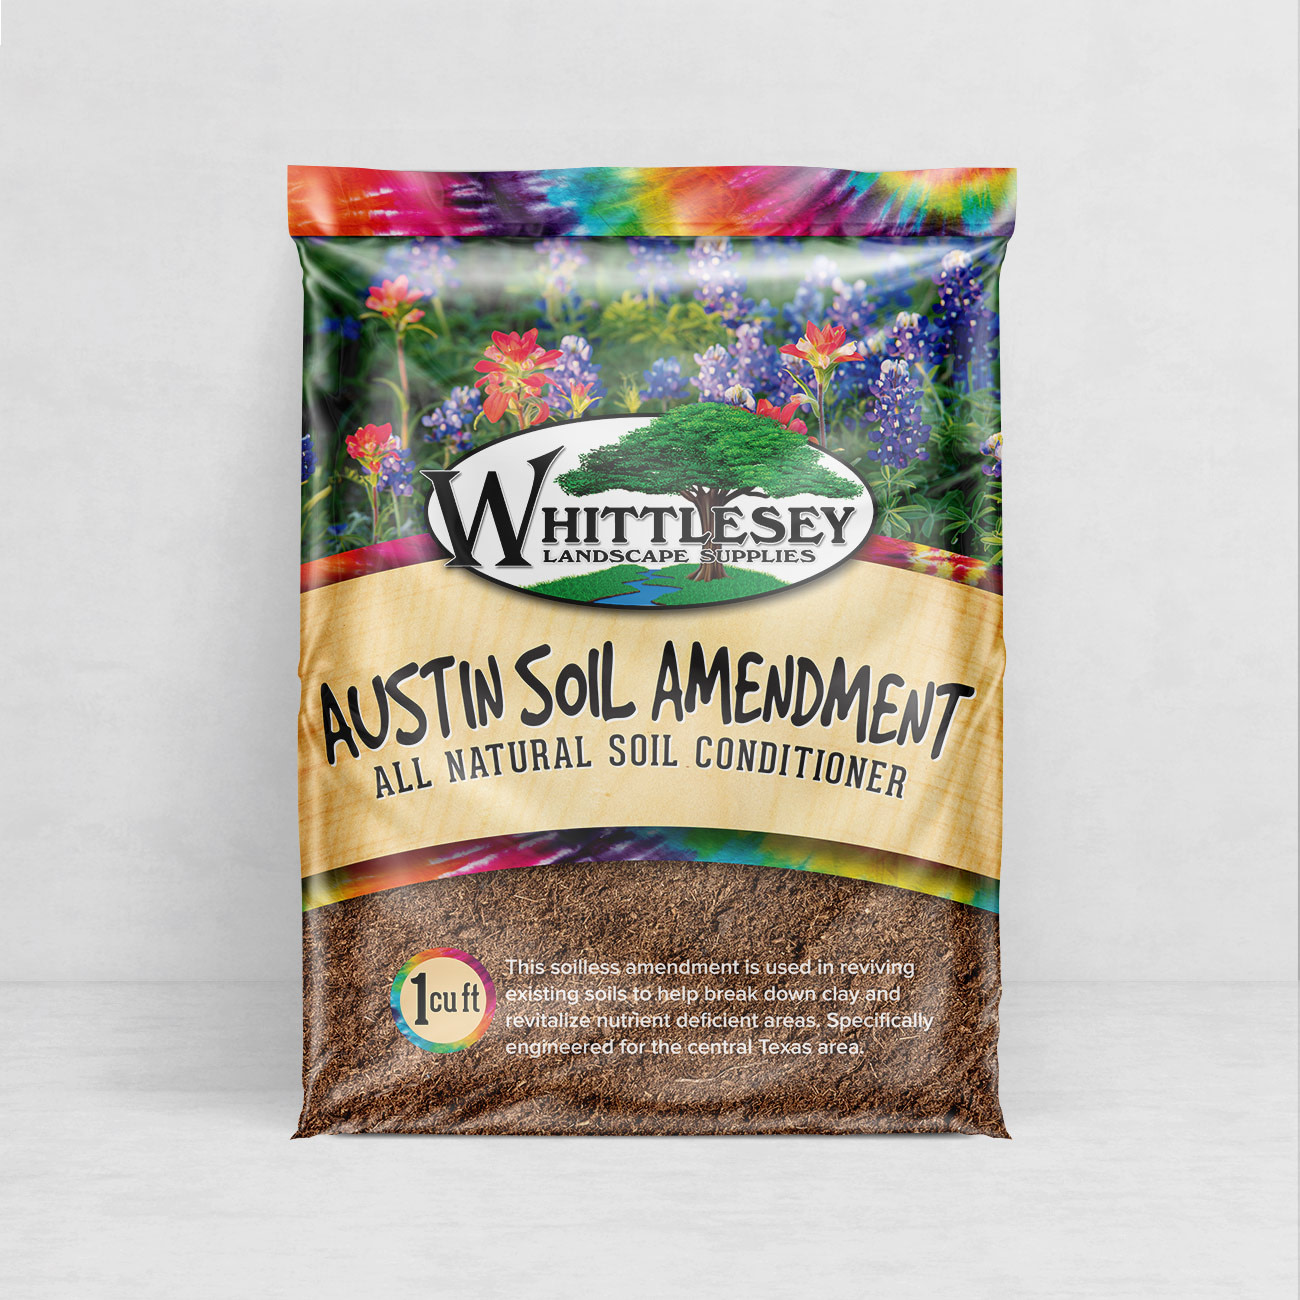 Whittlesey Landscape Supplies – Soil Product Line